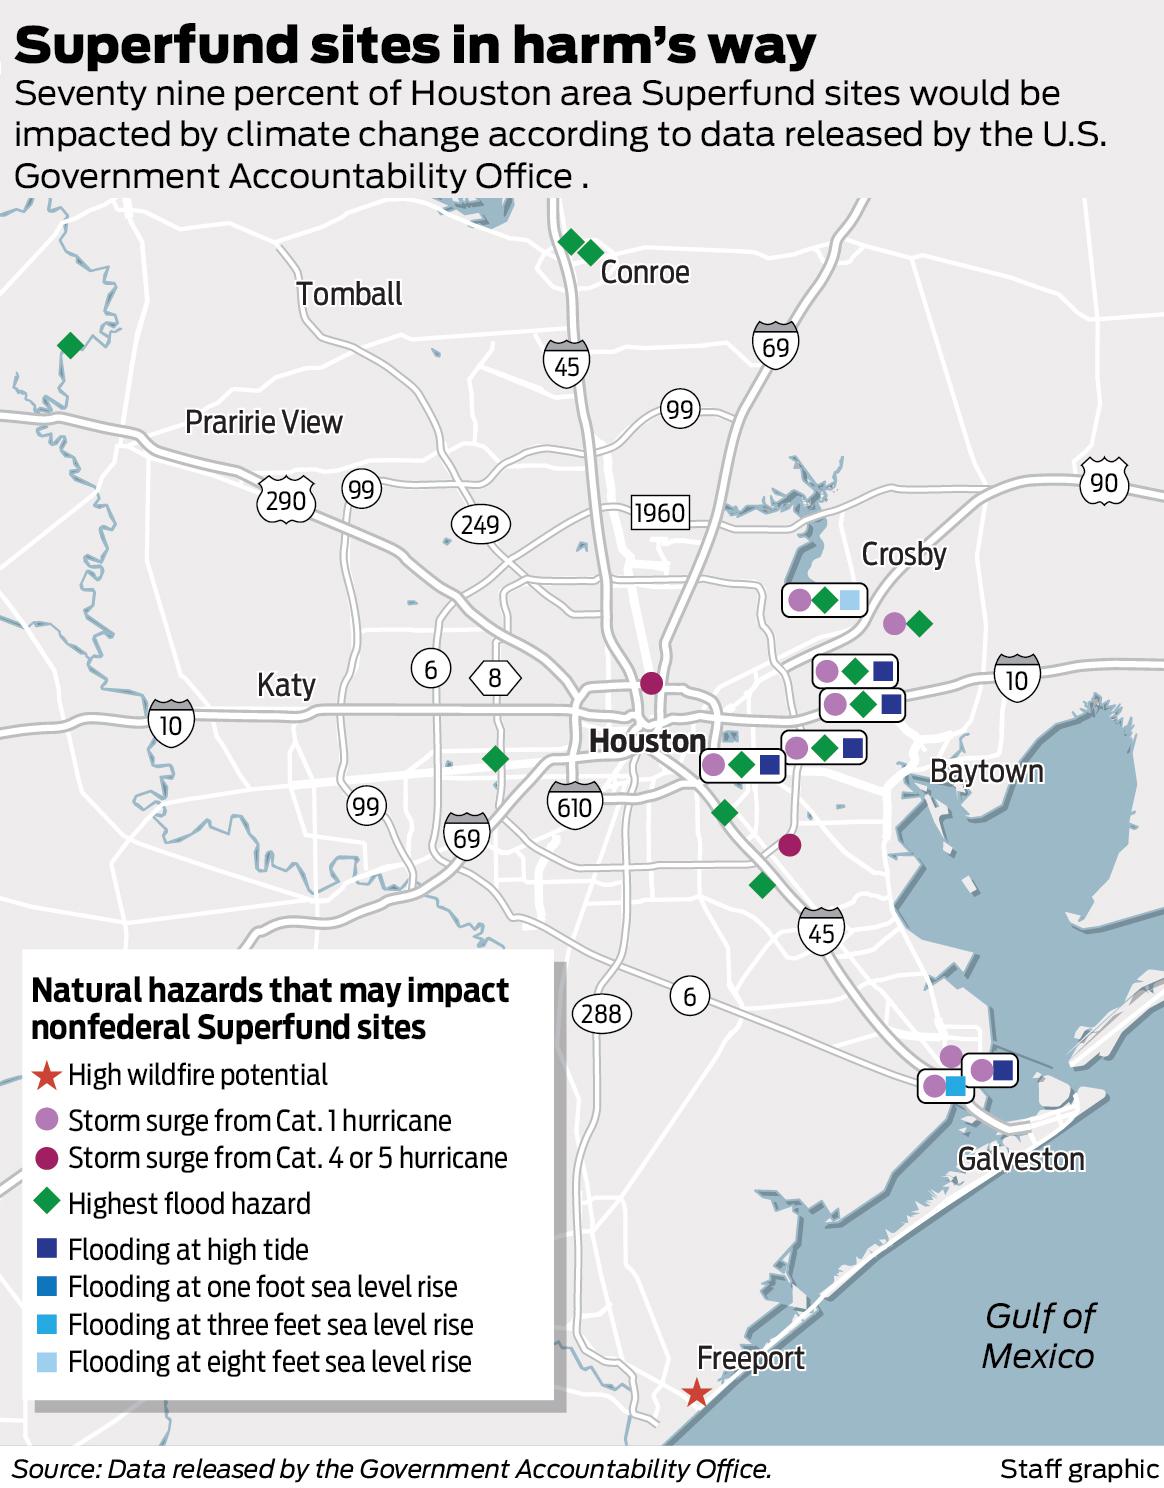 Climate change threatens nearly 80% of Superfund sites in Houston area, GAO says - Houston Chronicle